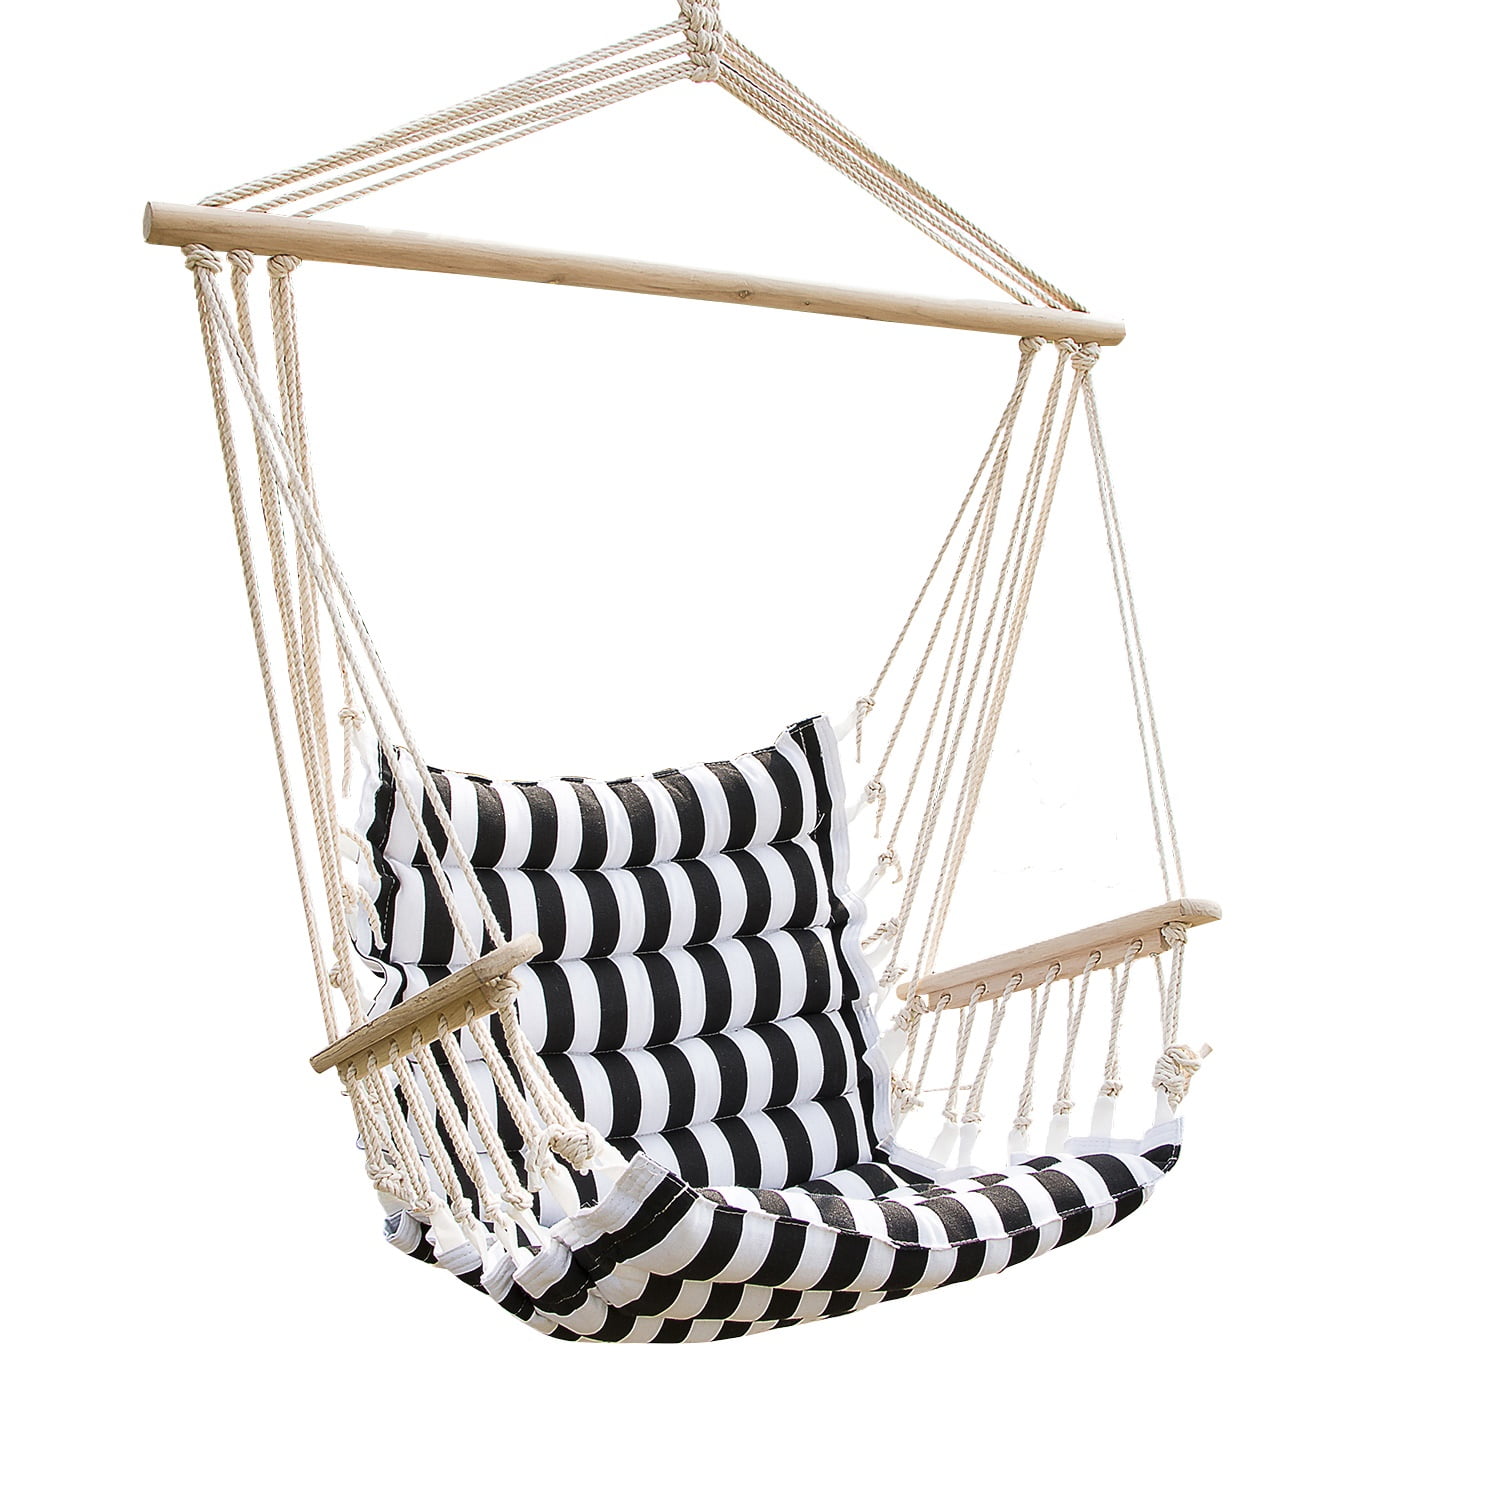 Chair Hammock Indoor Outdoor Use Rope Construction Cotton